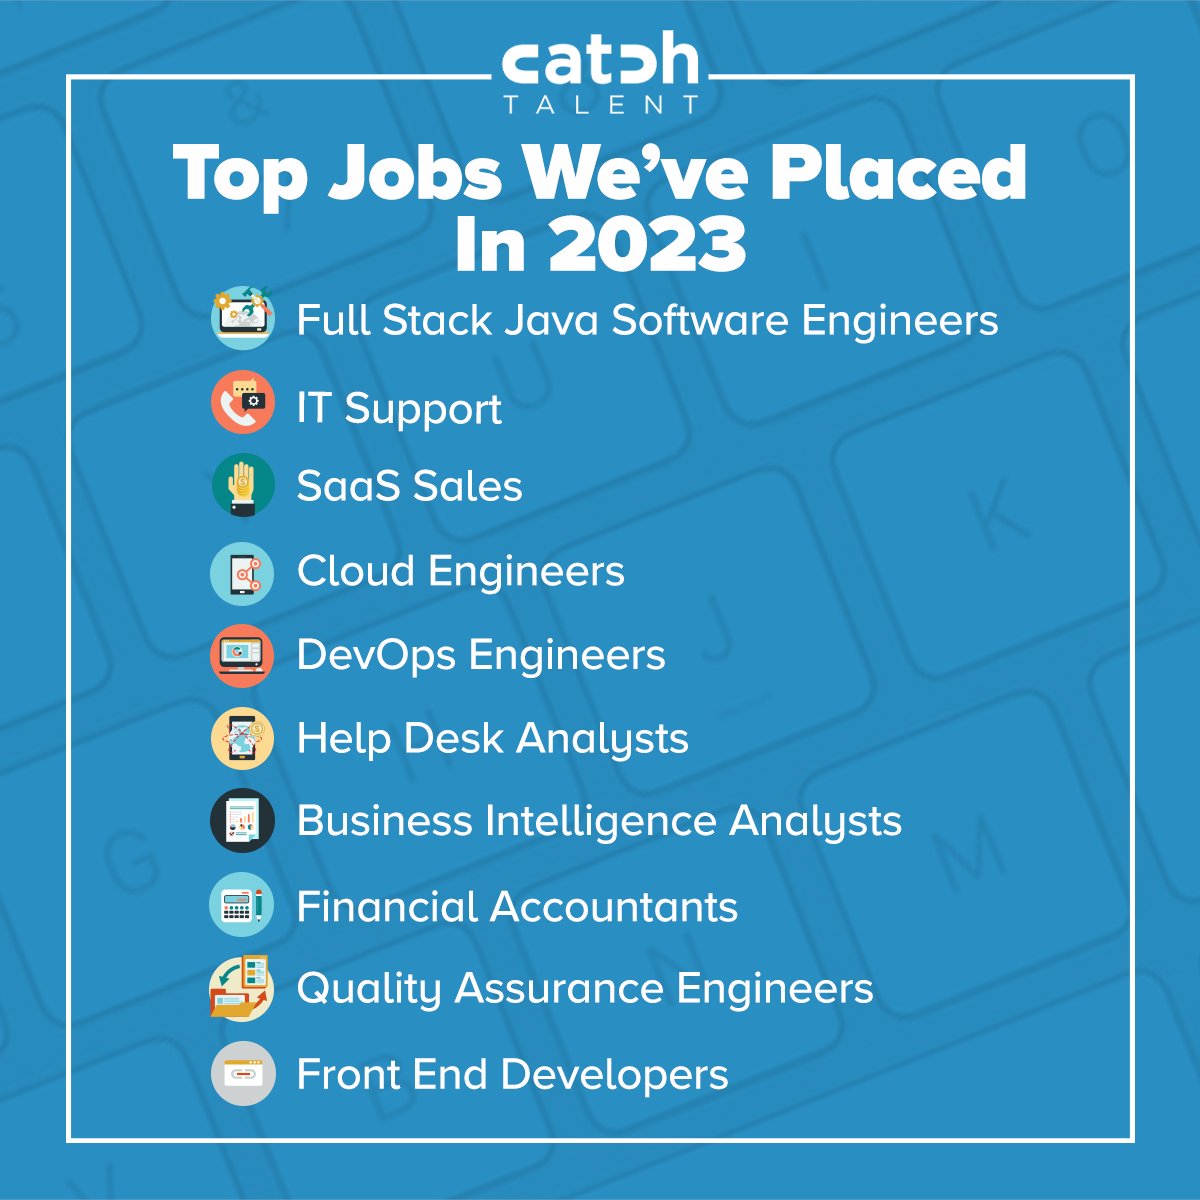 So far in 2023, these are the roles we place most often... Check it out! #techroles #technicalrecruitment #recruiting #hiring #techcareers #itjobs #javajobs #cloudengineer #bianalyst #hiringnow #salesjobs #frontenddeveloper